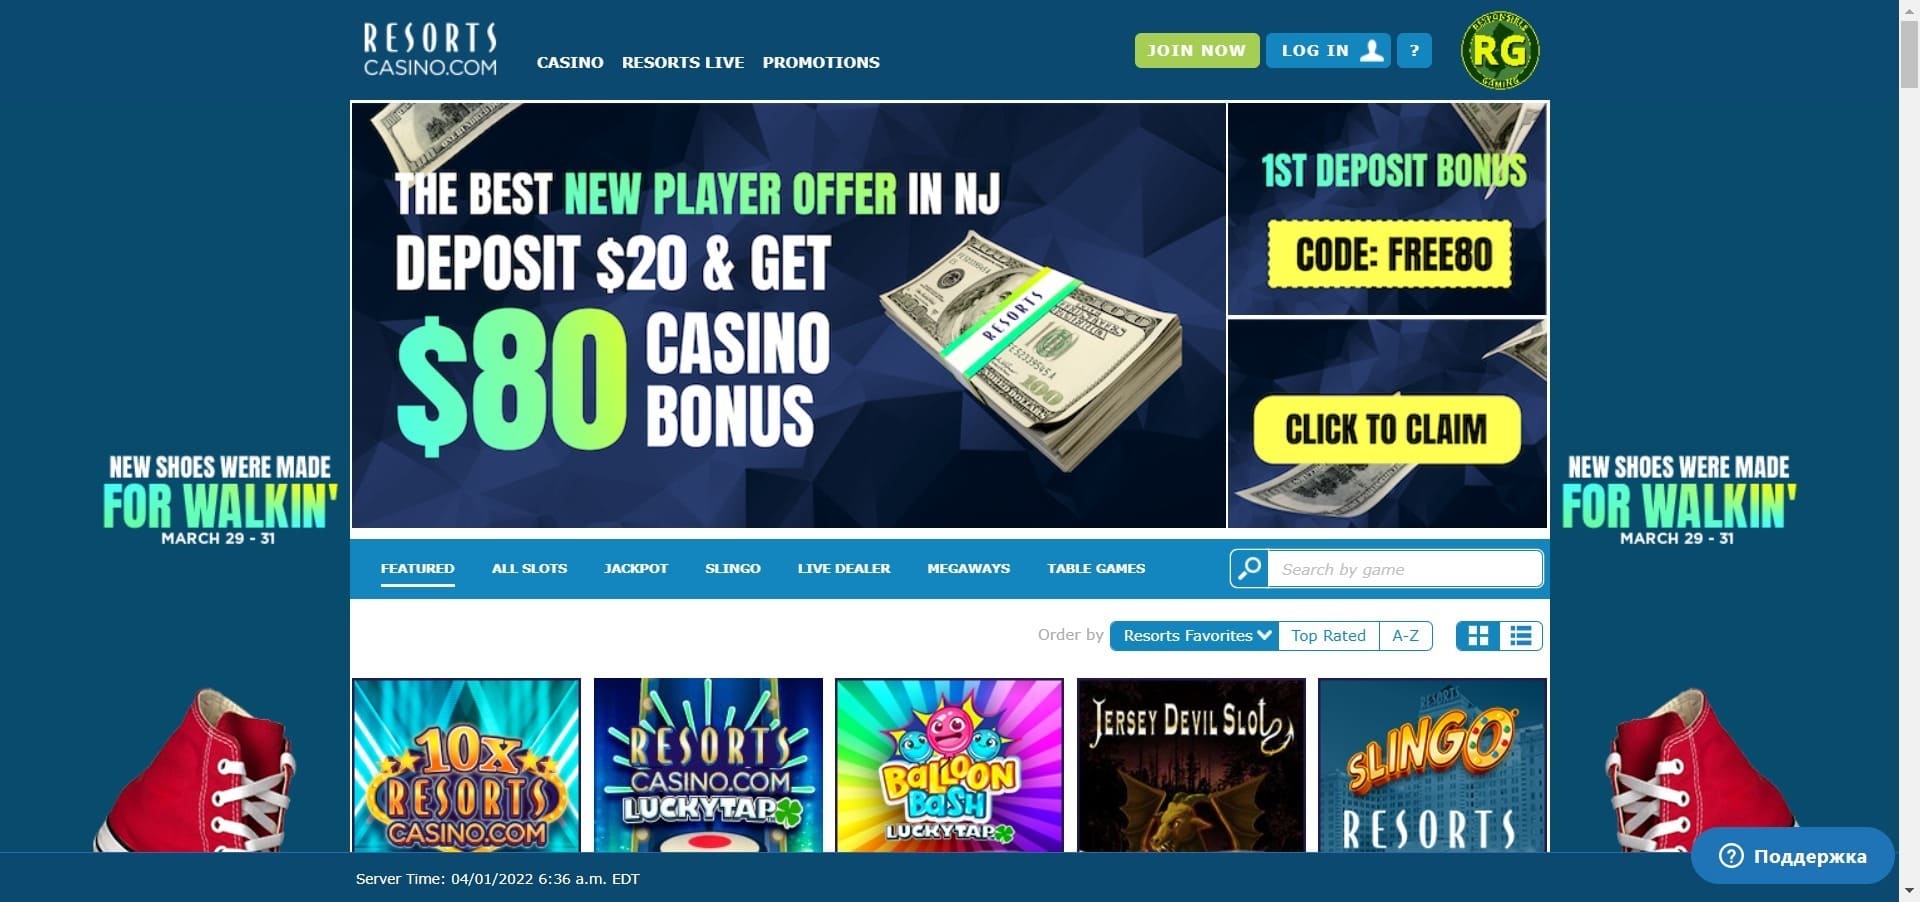 Official website of the Resorts Casino